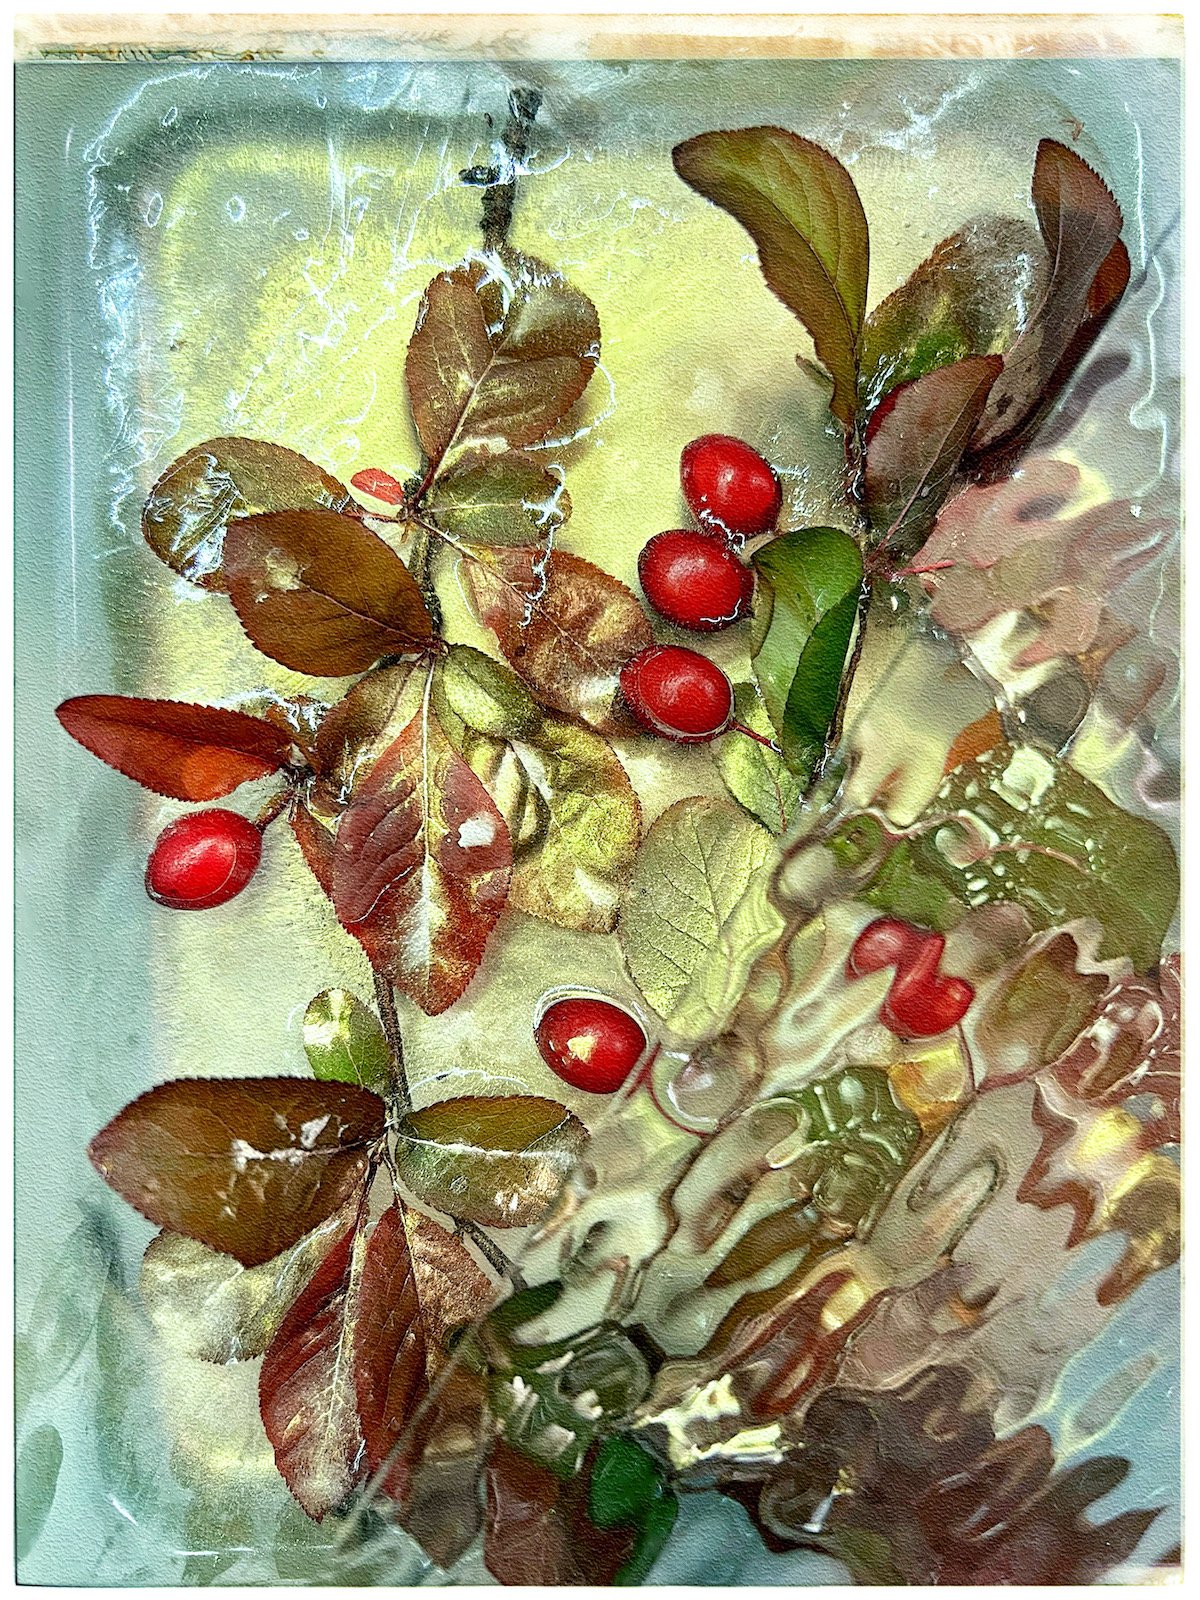 Spring berries in iced malachite through wavy glass